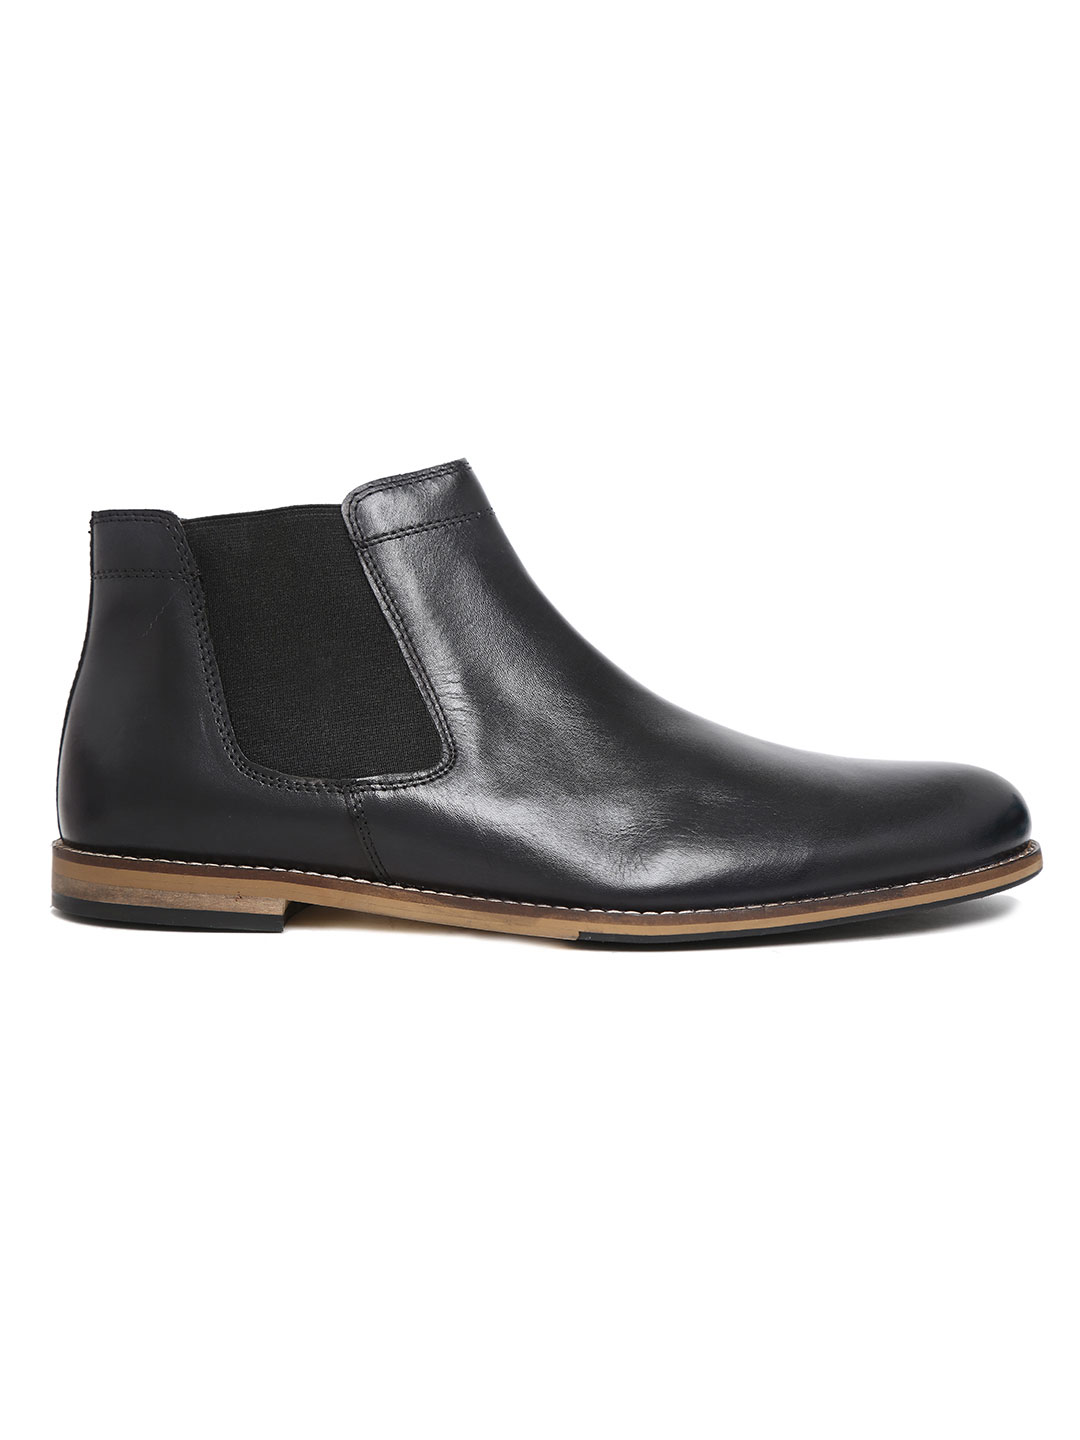 Buy Genuine Leather Black Chelsea Boots | Hats Off Accessories